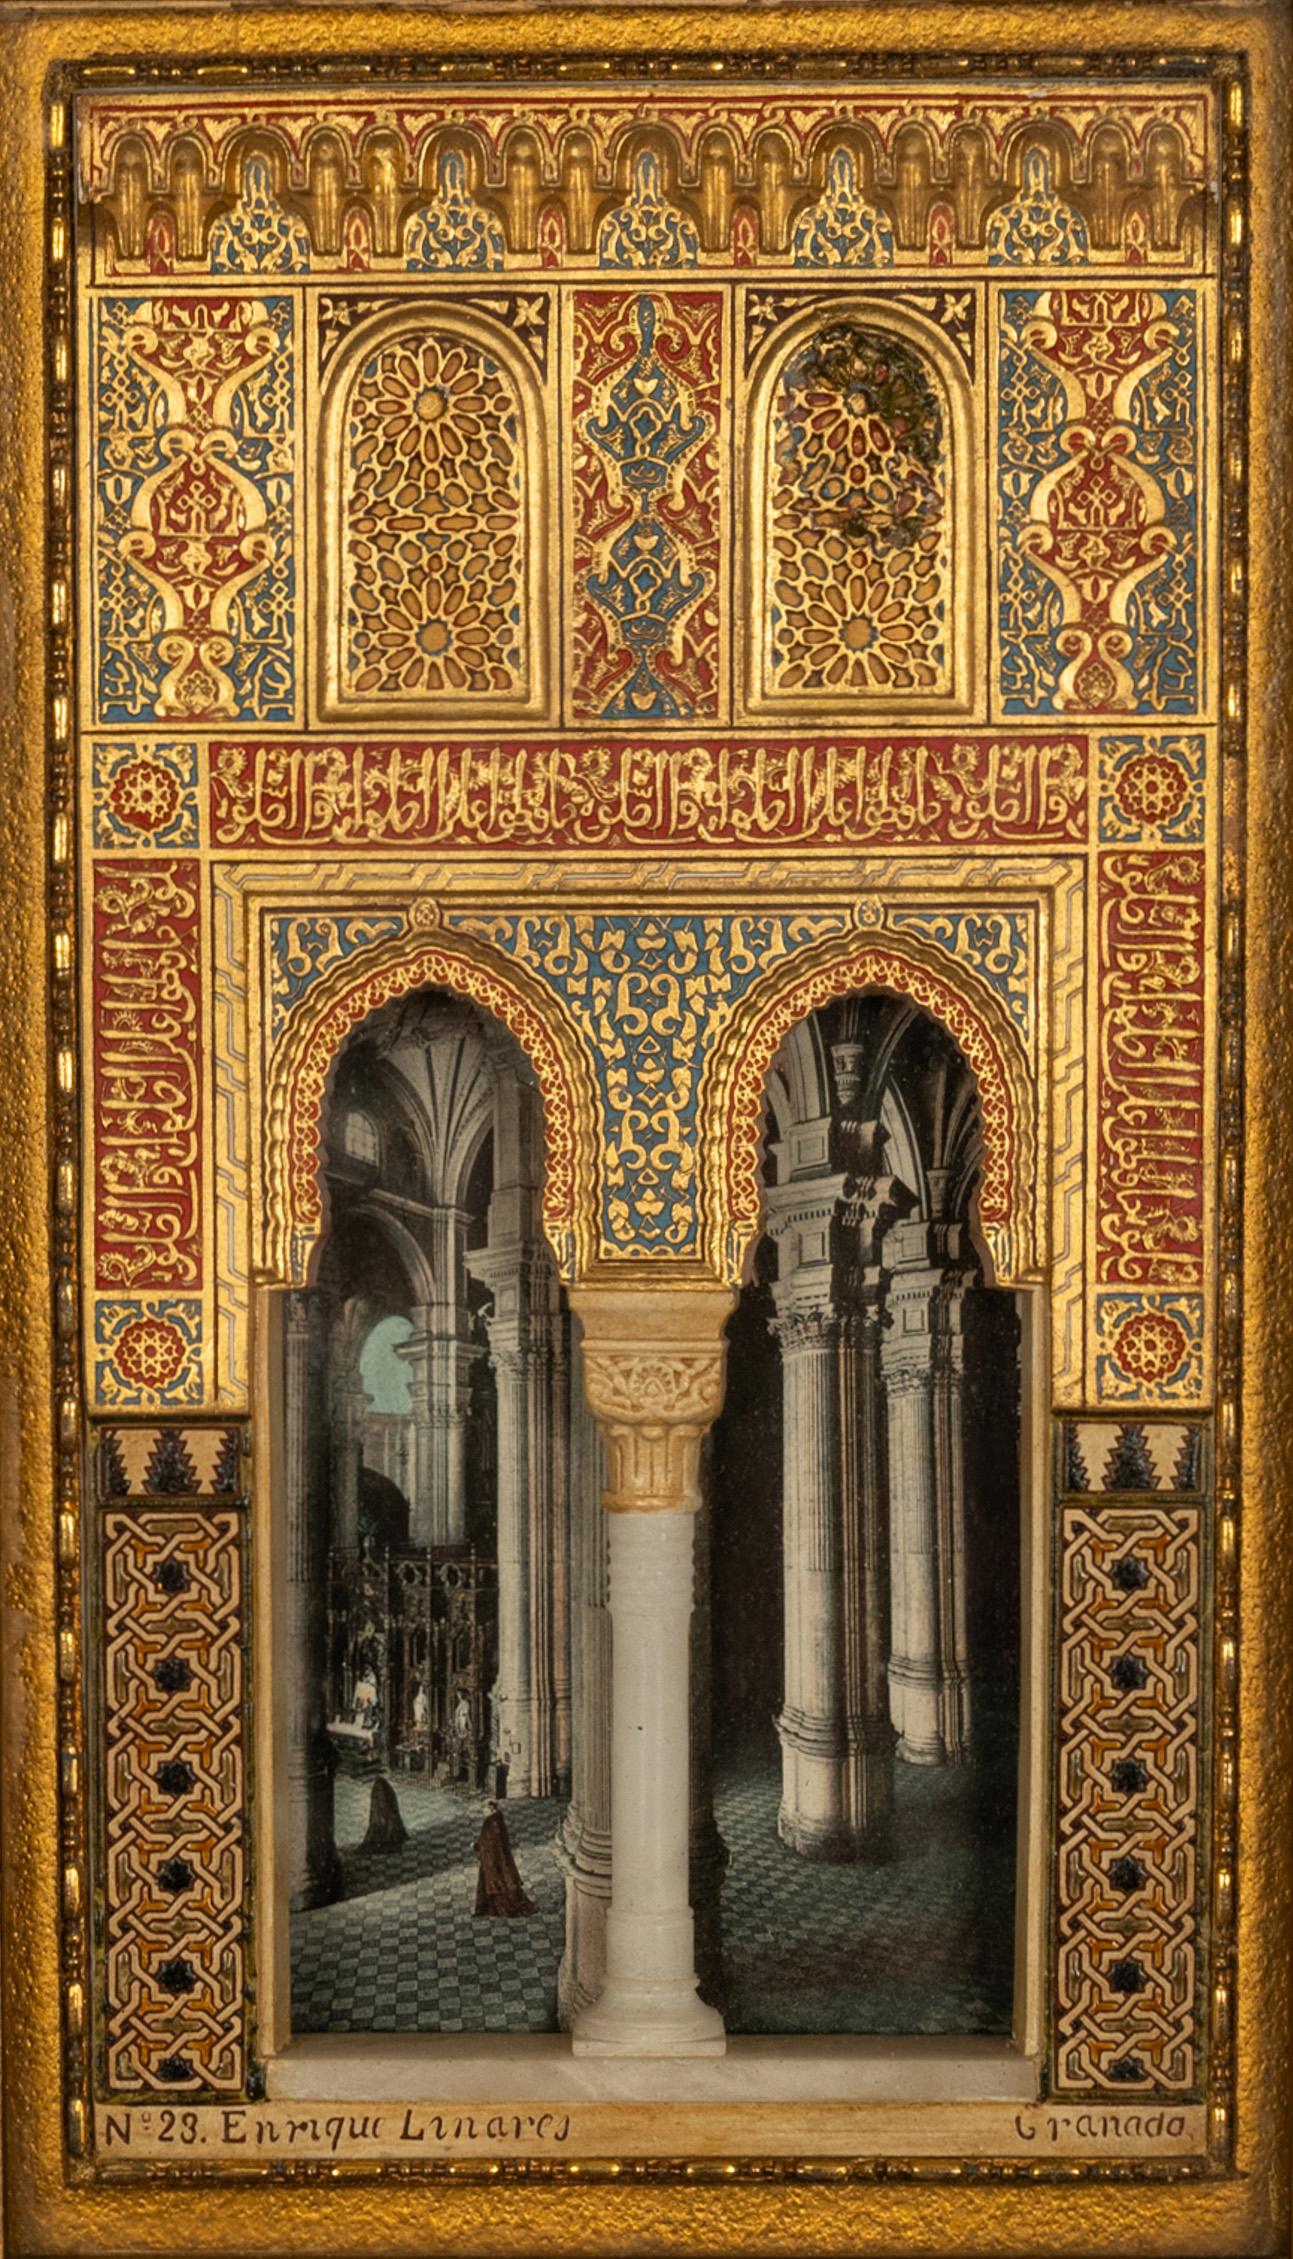 An antique marble, gesso, polychrome & gilt framed Alhambra plaque, by Enrique Linares, Granada, Spain, circa 1910.
The framed panel depicting a facade with a double mihrab and two windows above, lavishly decorated in gilt and polychrome with Nasrid